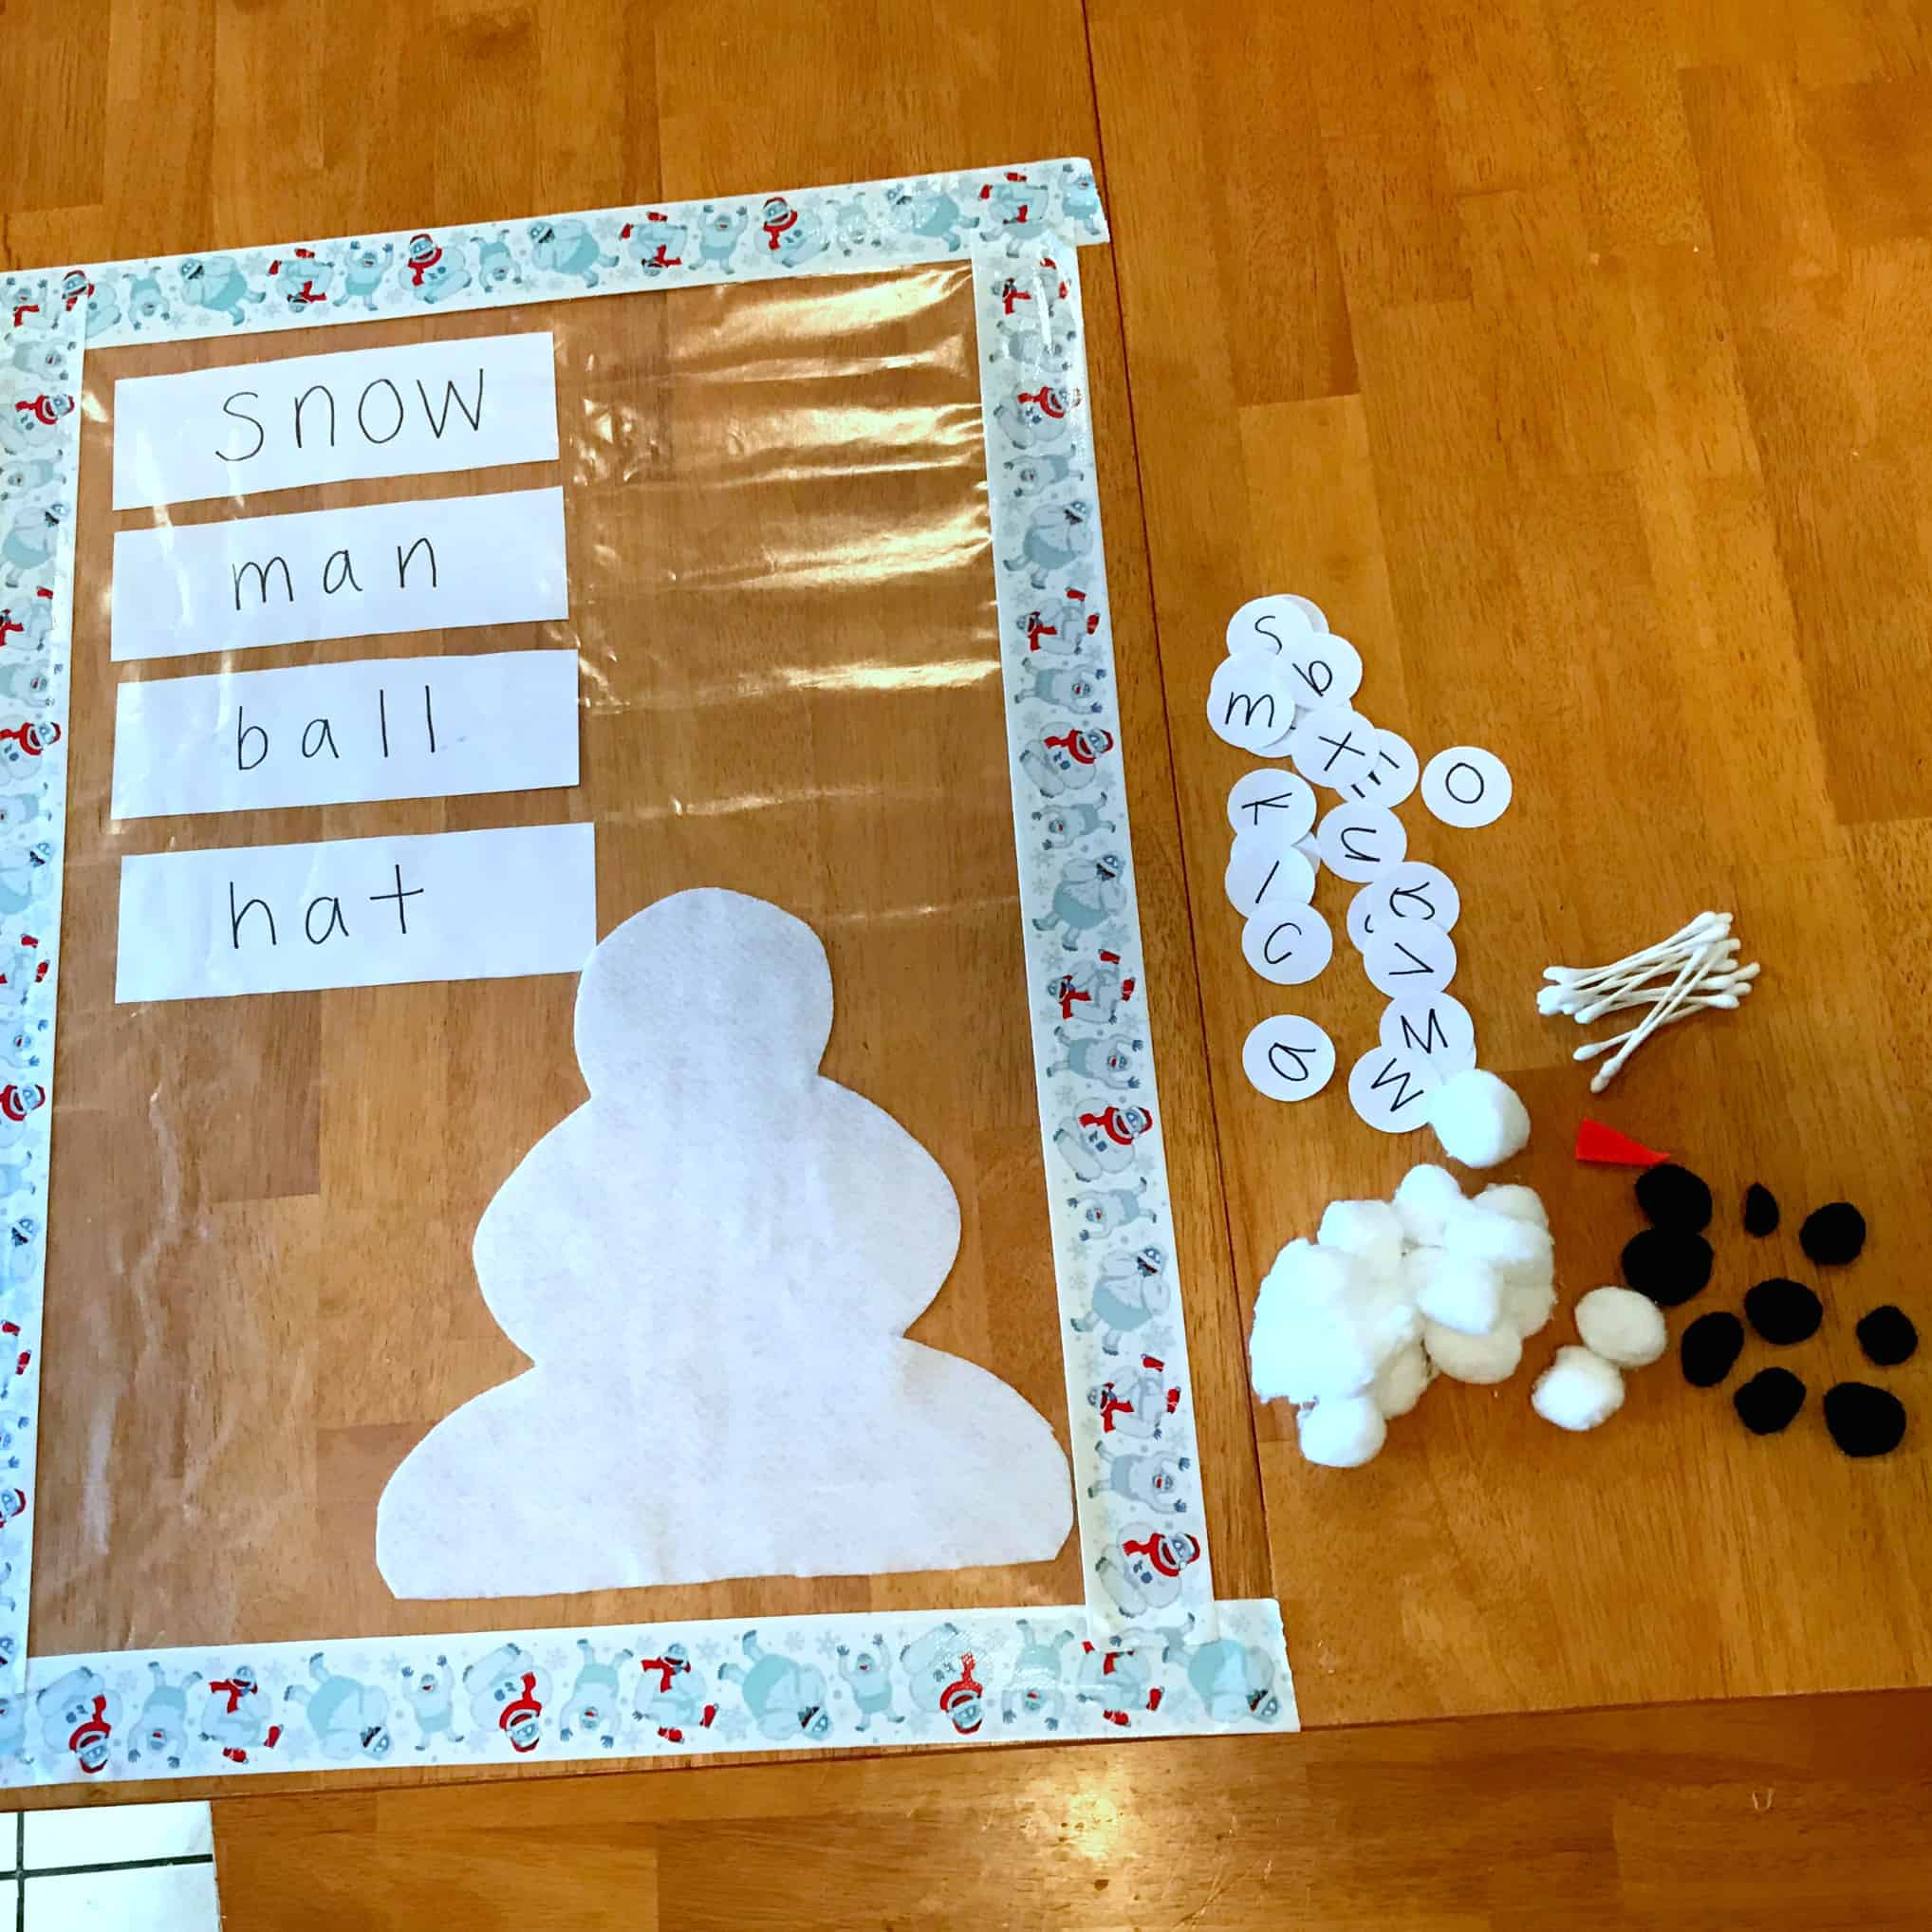 This activity is perfect for kids of varying ages. Decorate the snowman or spell snowball sight words on a sticky table! Preschoolers love this!